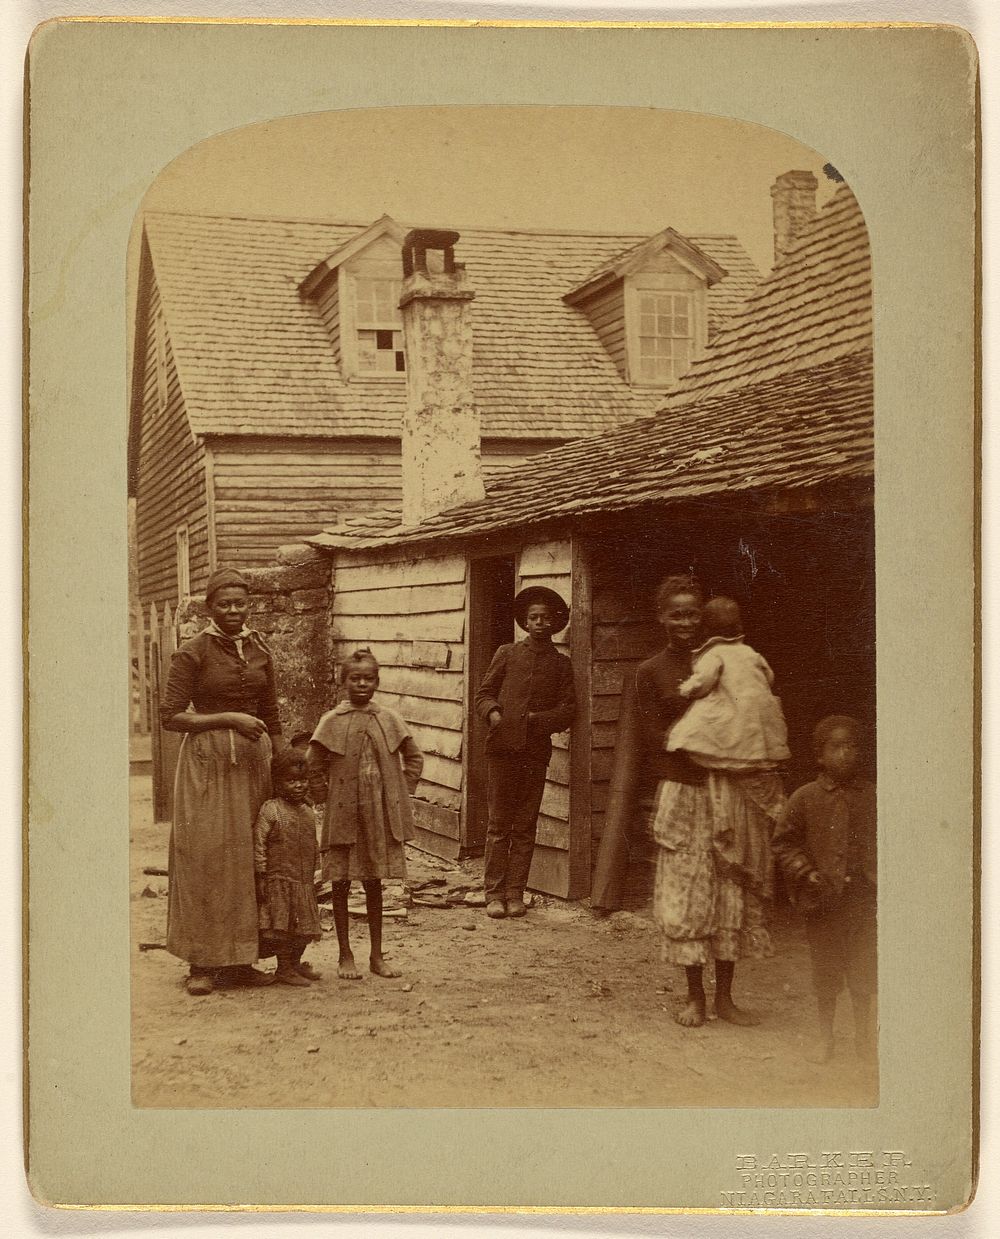 Portrait of a Black family standing in front of a house by George Barker